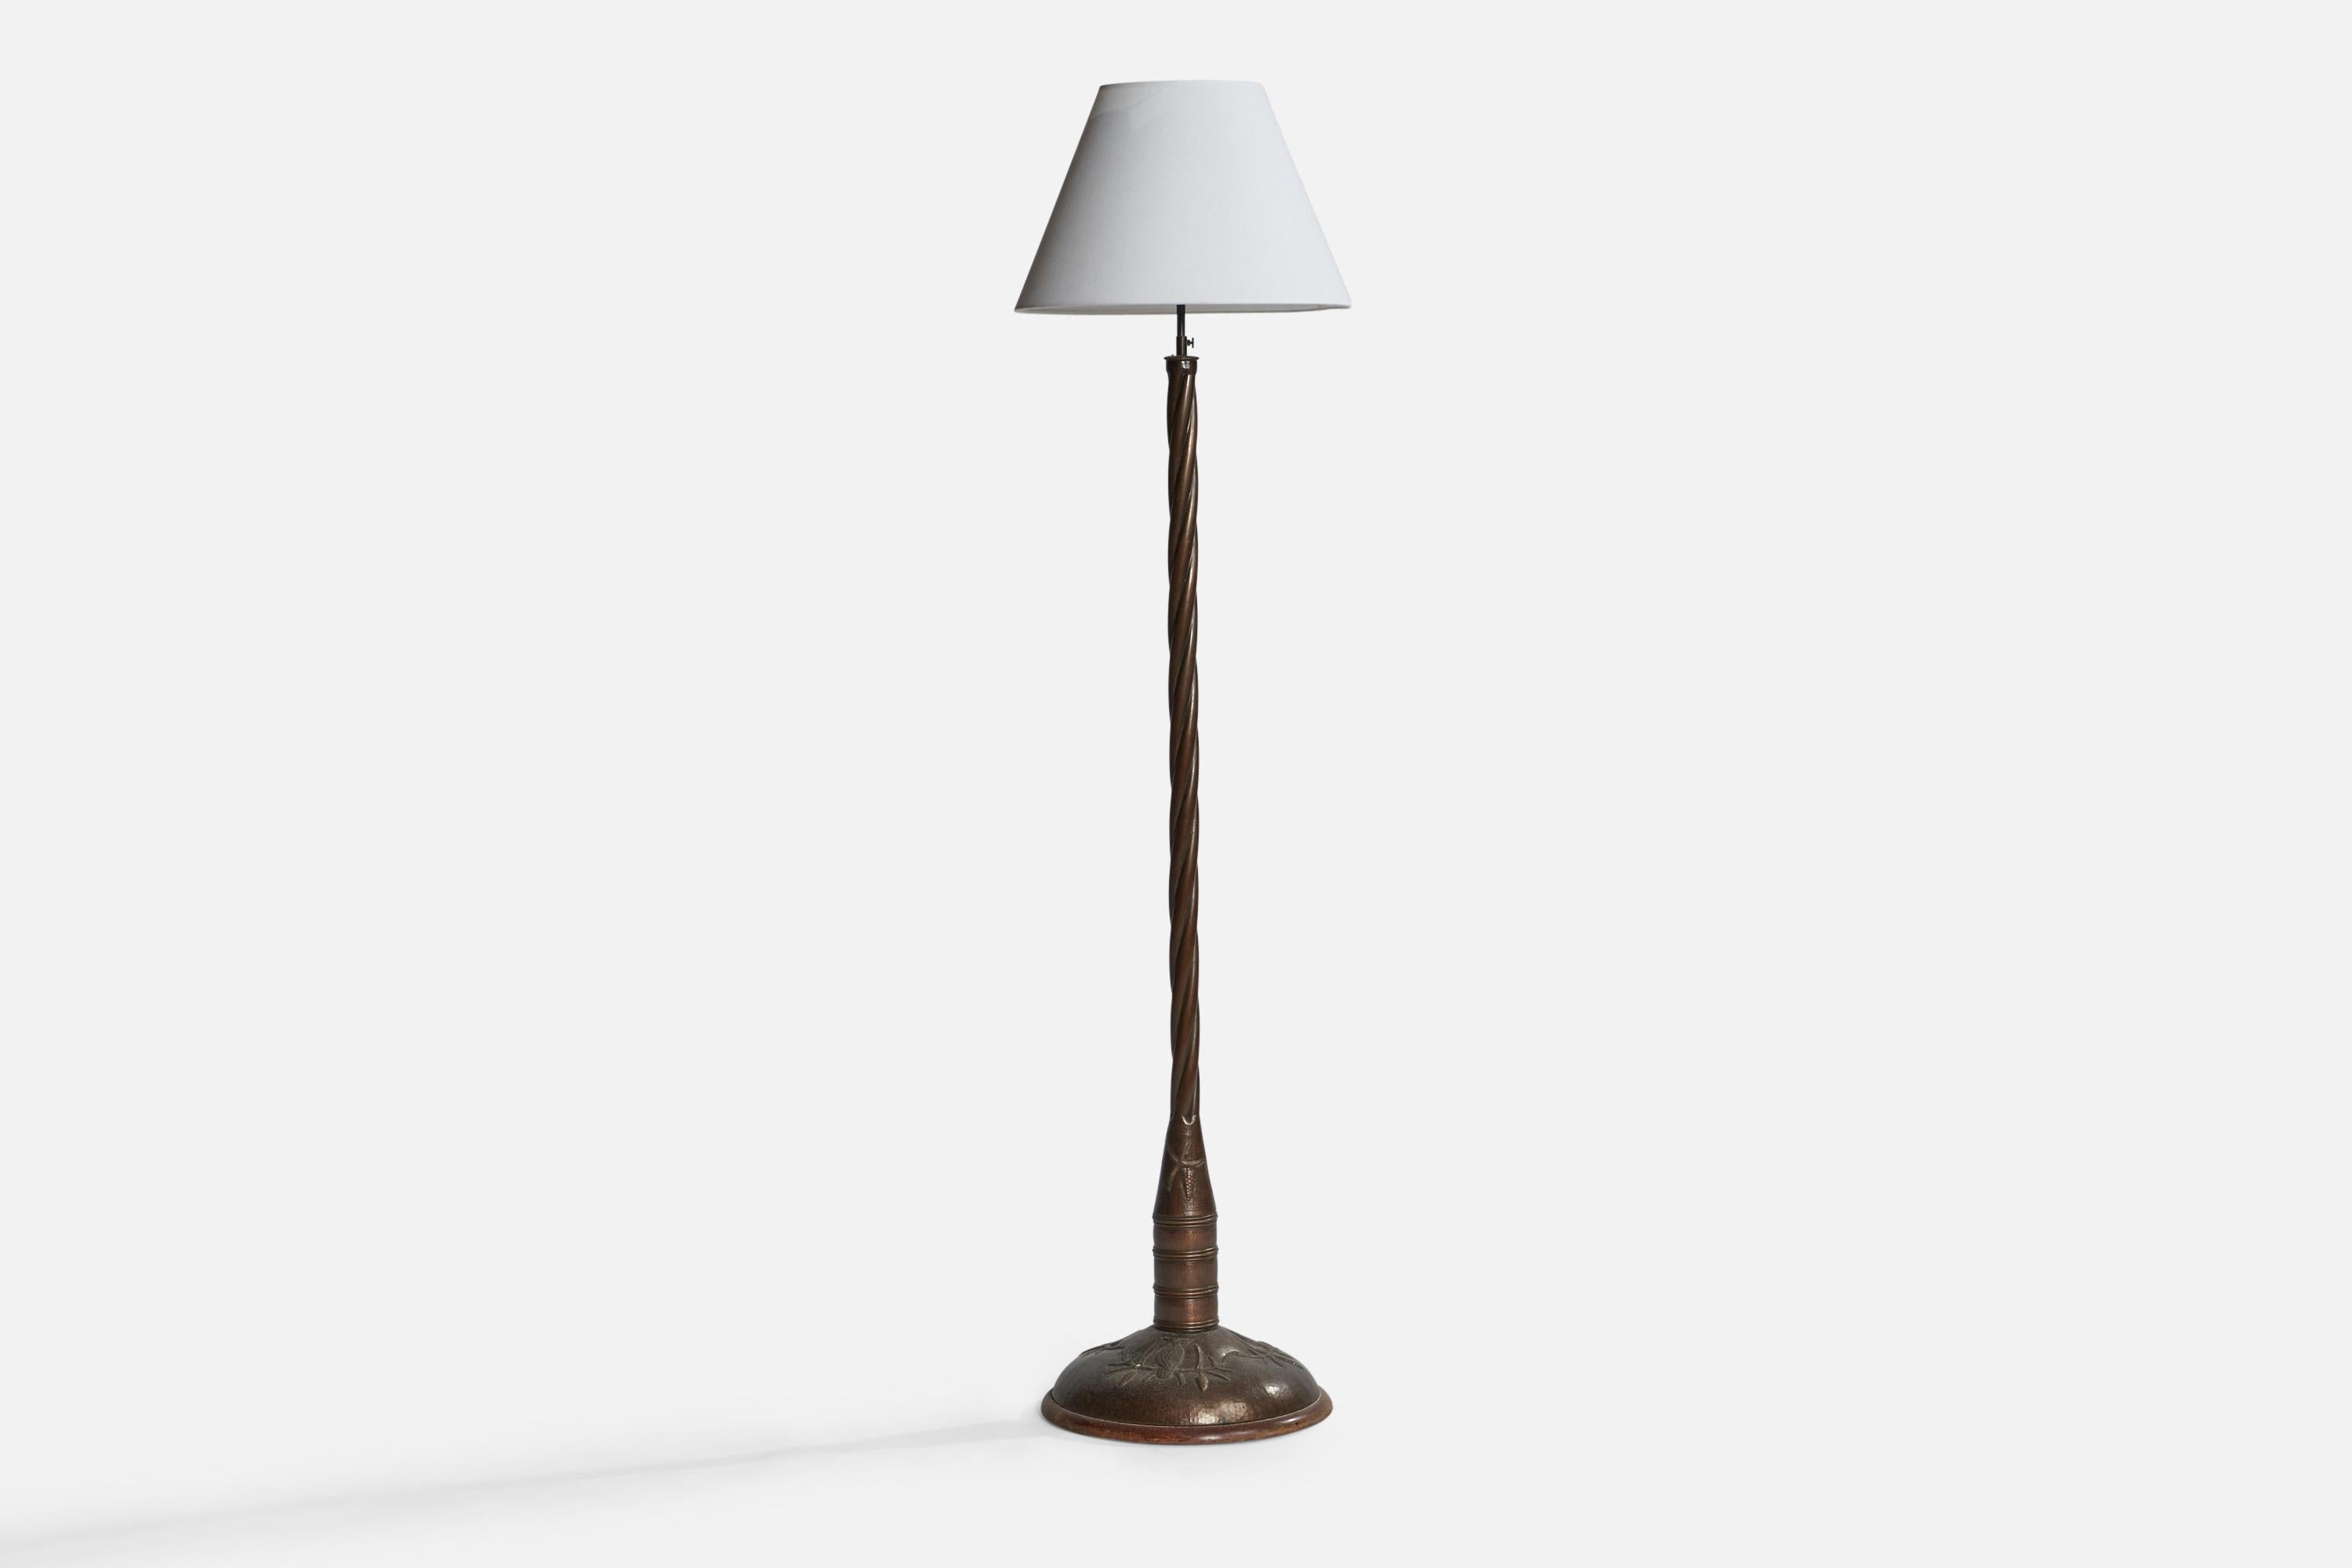 A sizeable copper and fabric floor lamp designed and produced in Sweden, 1920s.

Overall Dimensions (inches): 75.5” H x 19.1” Diameter. Stated dimensions include shade.
Bulb Specifications: E-26 Bulbs
Number of Sockets: 2
All lighting will be